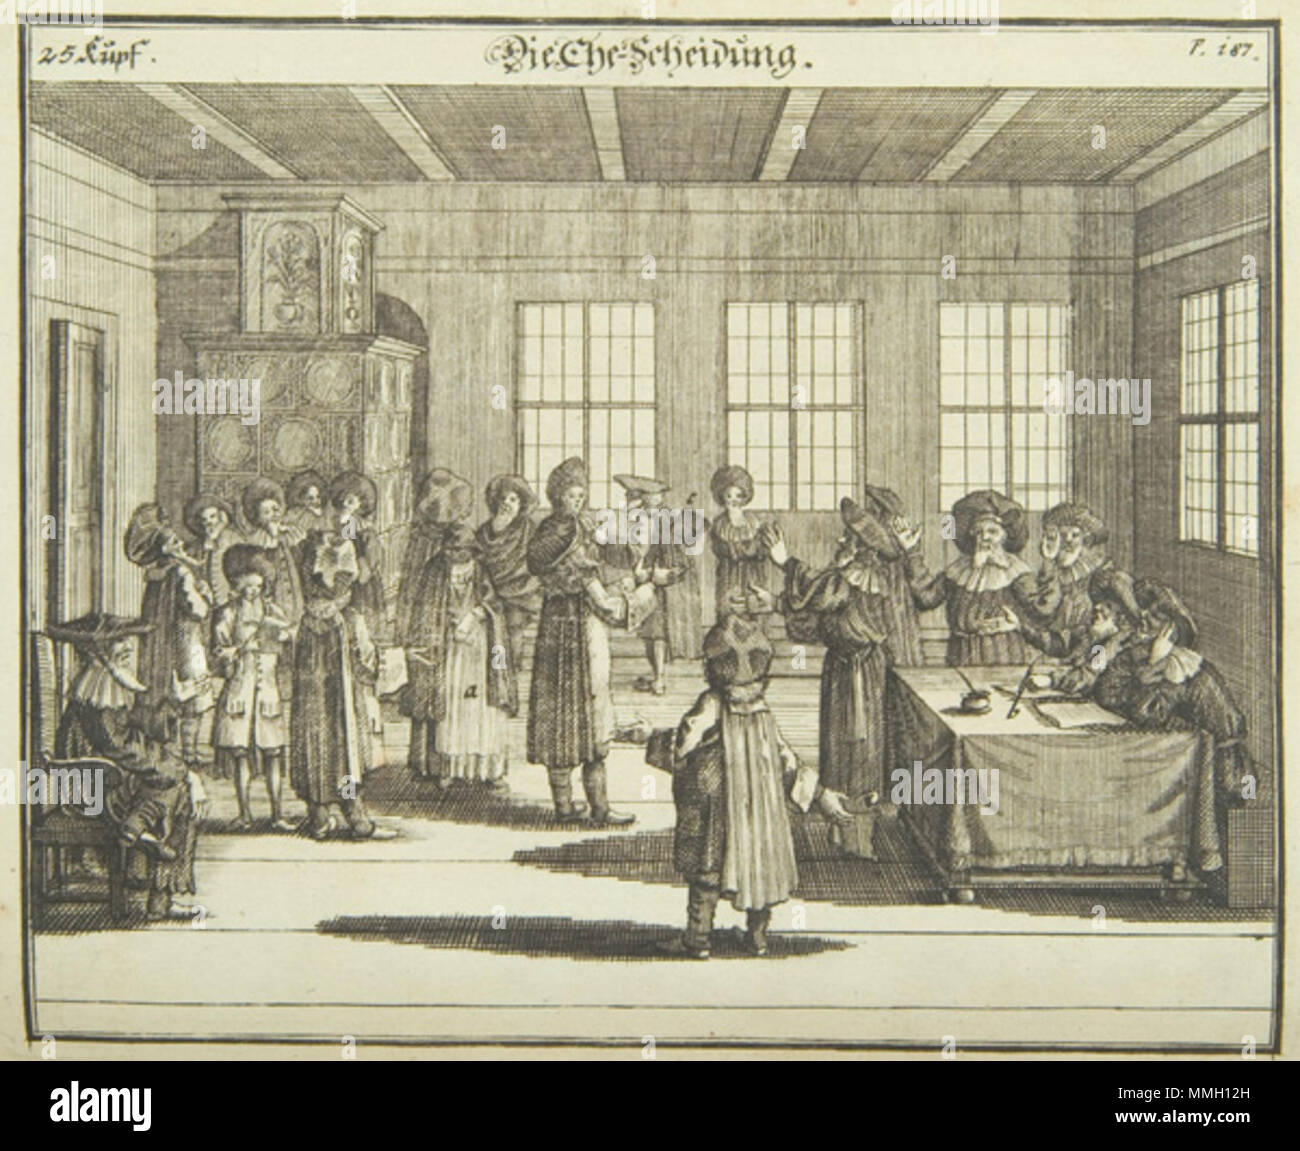 . English: Illustration from Juedisches Ceremoniel, a German book published in Nürnberg in 1724 by Peter Conrad Monath. The book is a beautifully illustrated description of Jewish religious ceremonies, rites of passage and feast days, which first appeared in 1716, here in its second edition of 1724. The extremely detailed plates, by Georg Puschner, depict priestly robes, the celebrations of the New Year, Passover, the weekly Sabbath, circumcision, presentation of the first born, prayer at the synagogue, a wedding procession and a wedding, purification of the bride, the washing of the brother-i Stock Photo